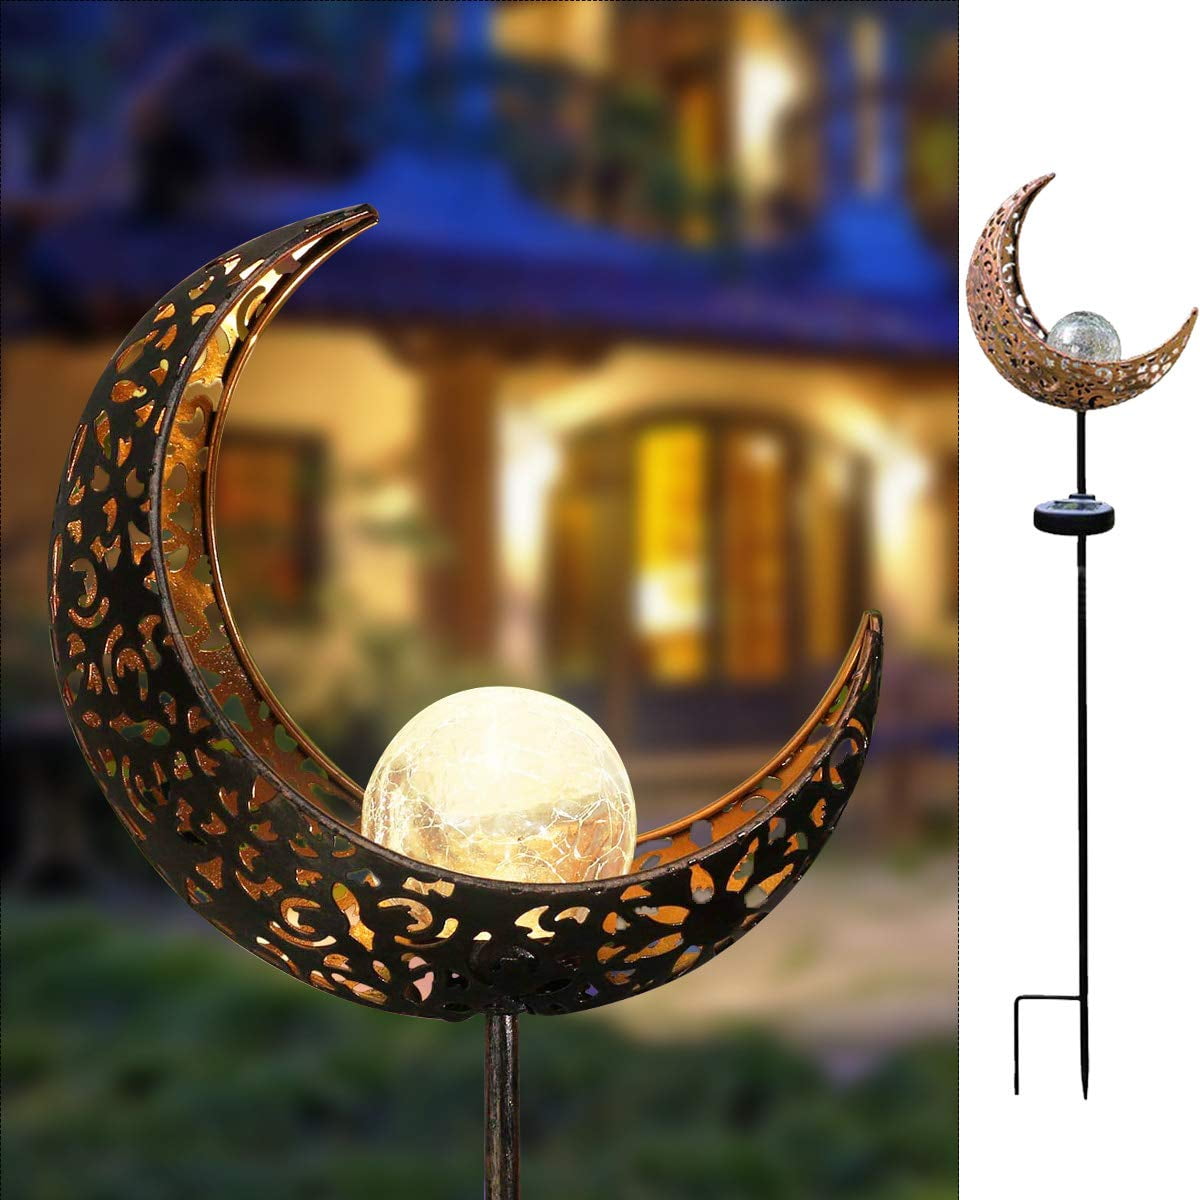 HOMIMP Garden Solar Light Outdoor Flame Crackle Glass Ball LED Path Lights with Metal Art Stake Waterproof for Pathway Lawn Patio Yard Bronze 